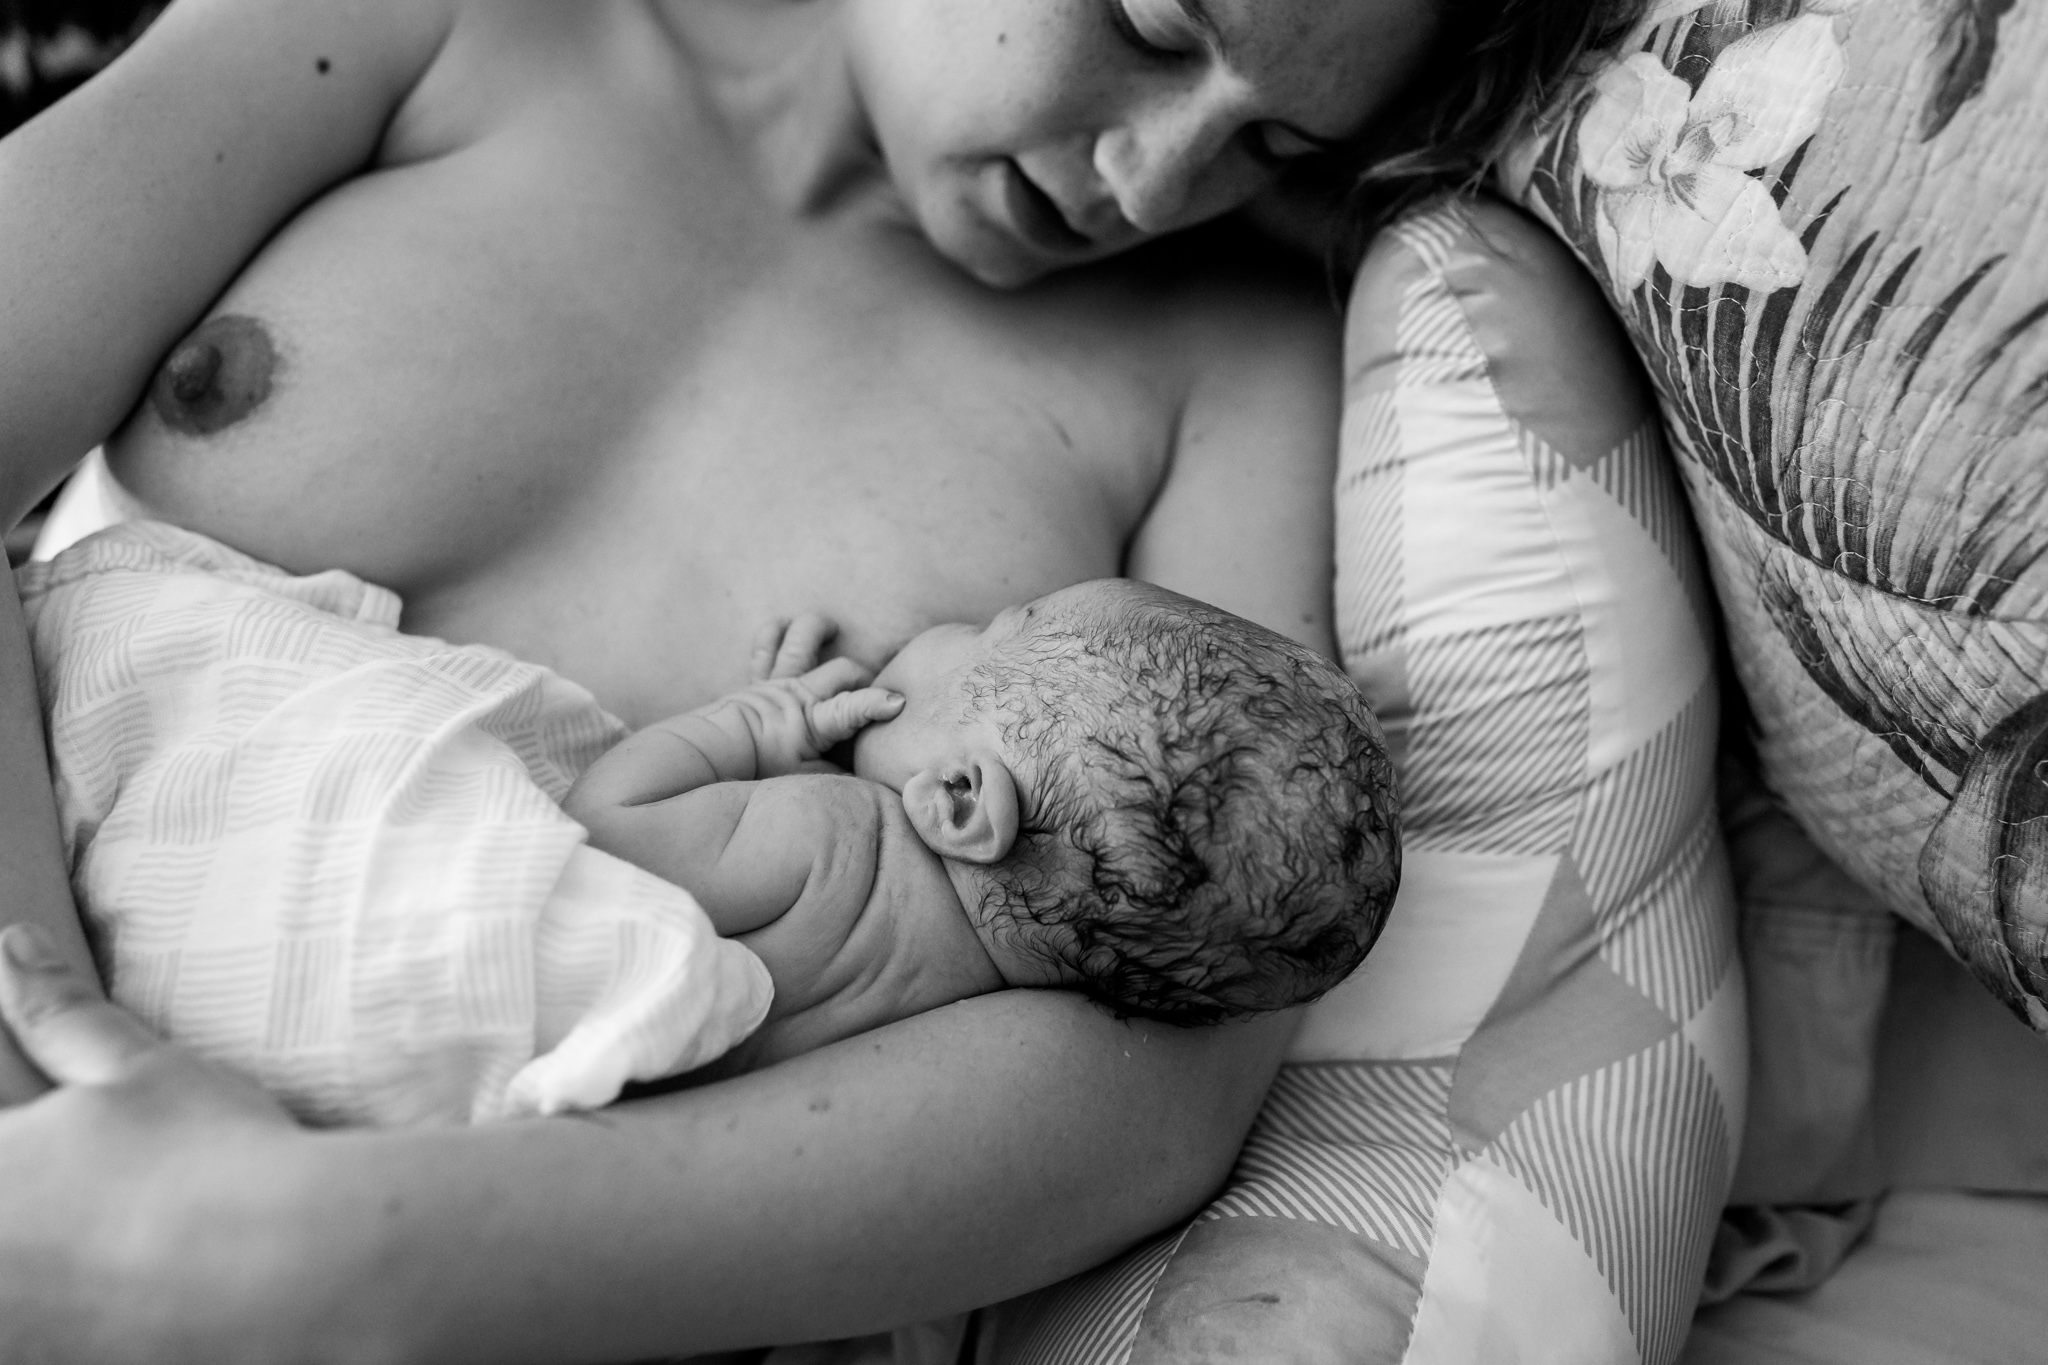 woman cuddles with baby on bed